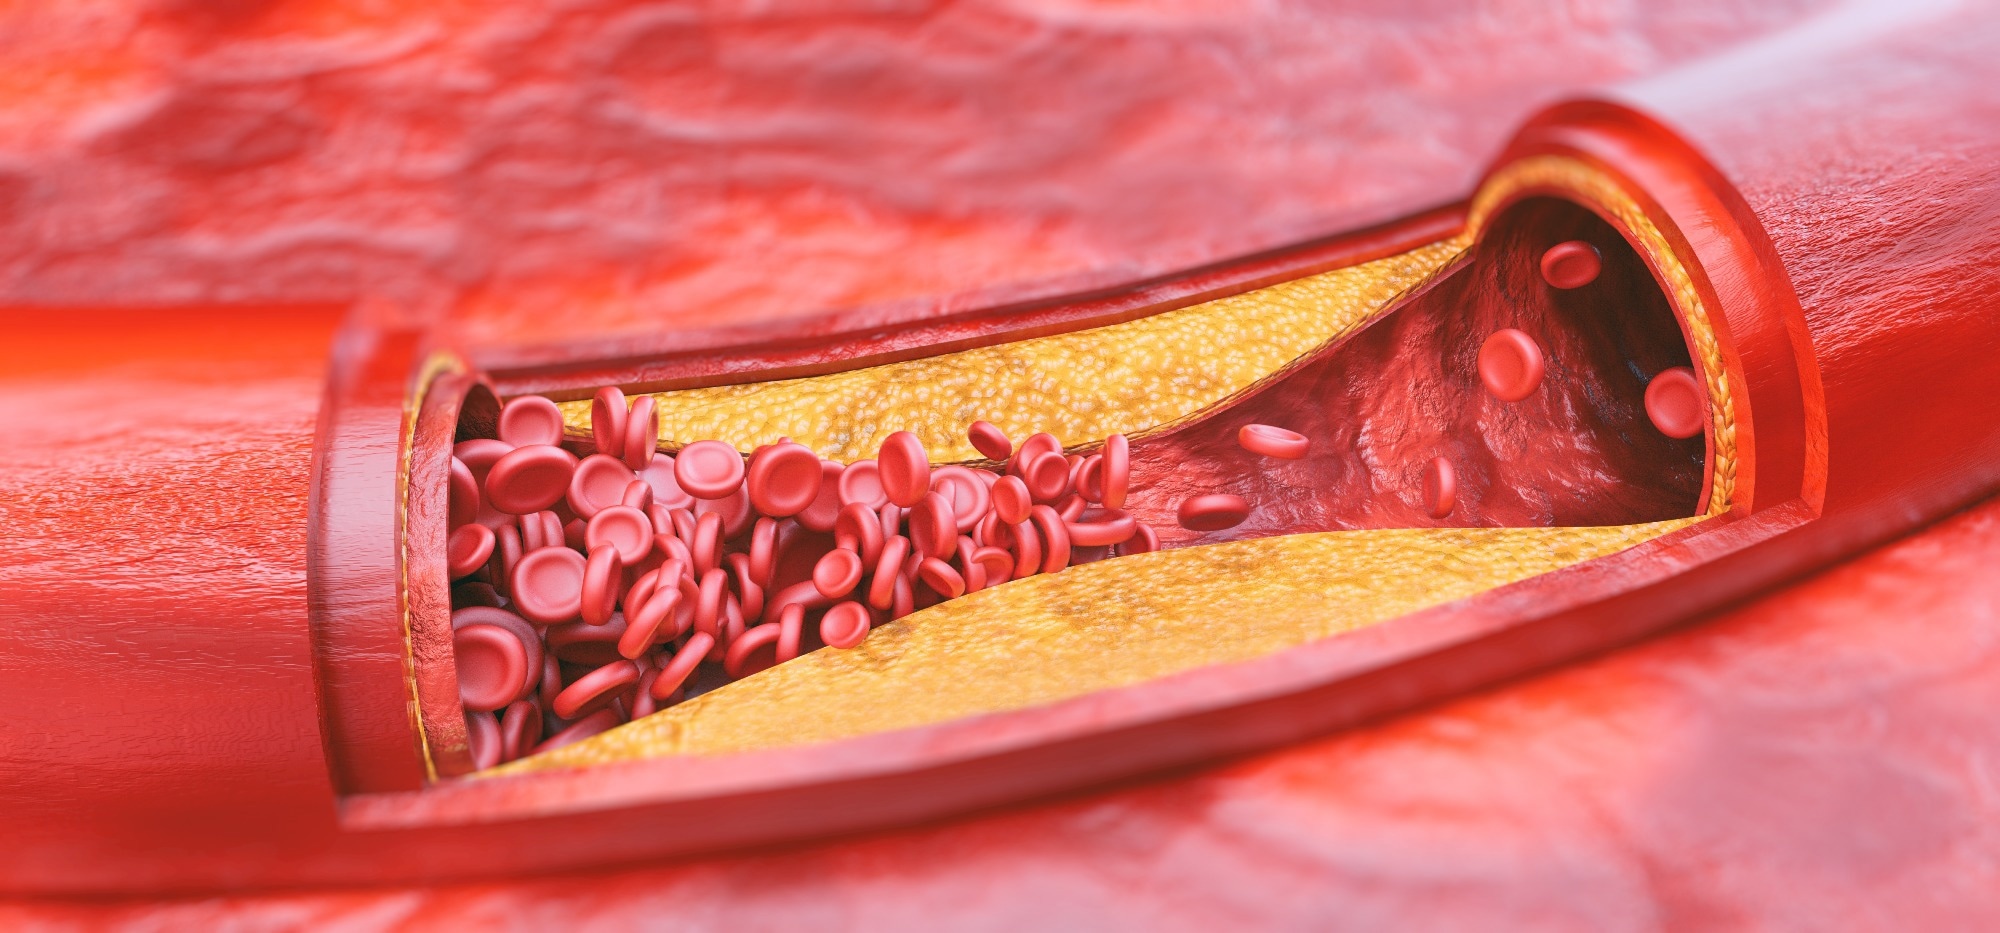 Study: Race-Dependent Association of High-Density Lipoprotein Cholesterol Levels With Incident Coronary Artery Disease. Image Credit: Crevis/Shutterstock